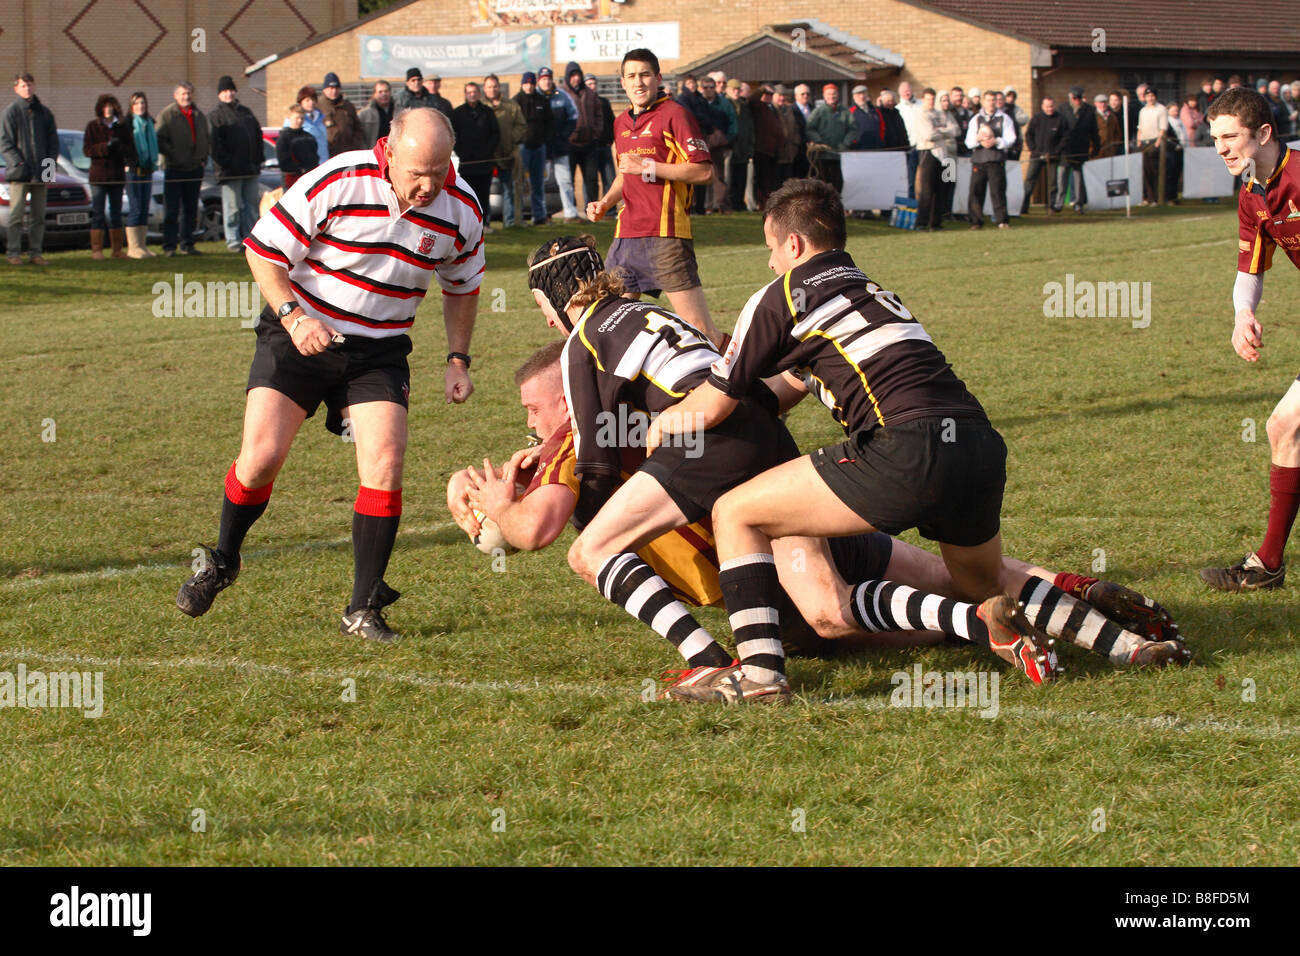 Amateur rugby match game with a try being scored with the ref referee watching in close attendance Stock Photo